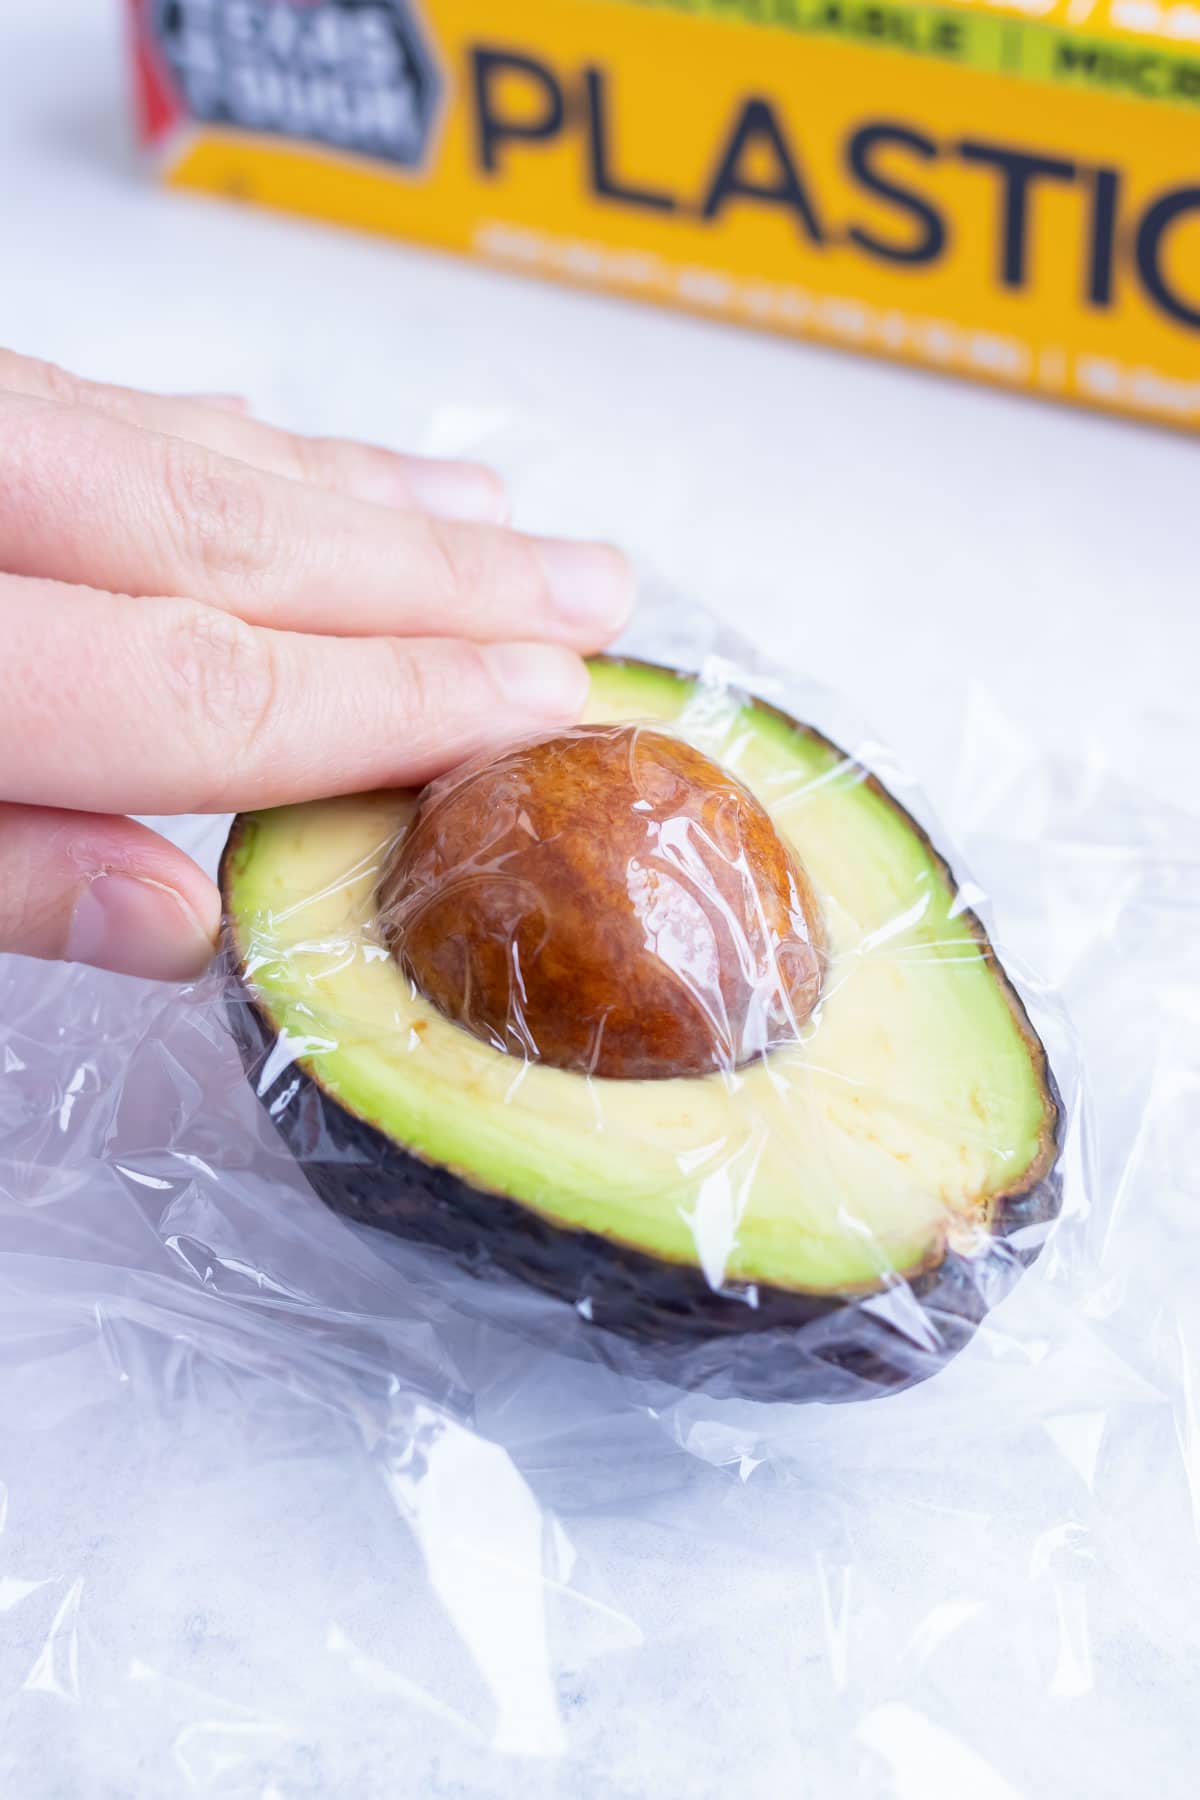 Pressing a piece of plastic wrap over a cut avocado to store it in the refrigerator.